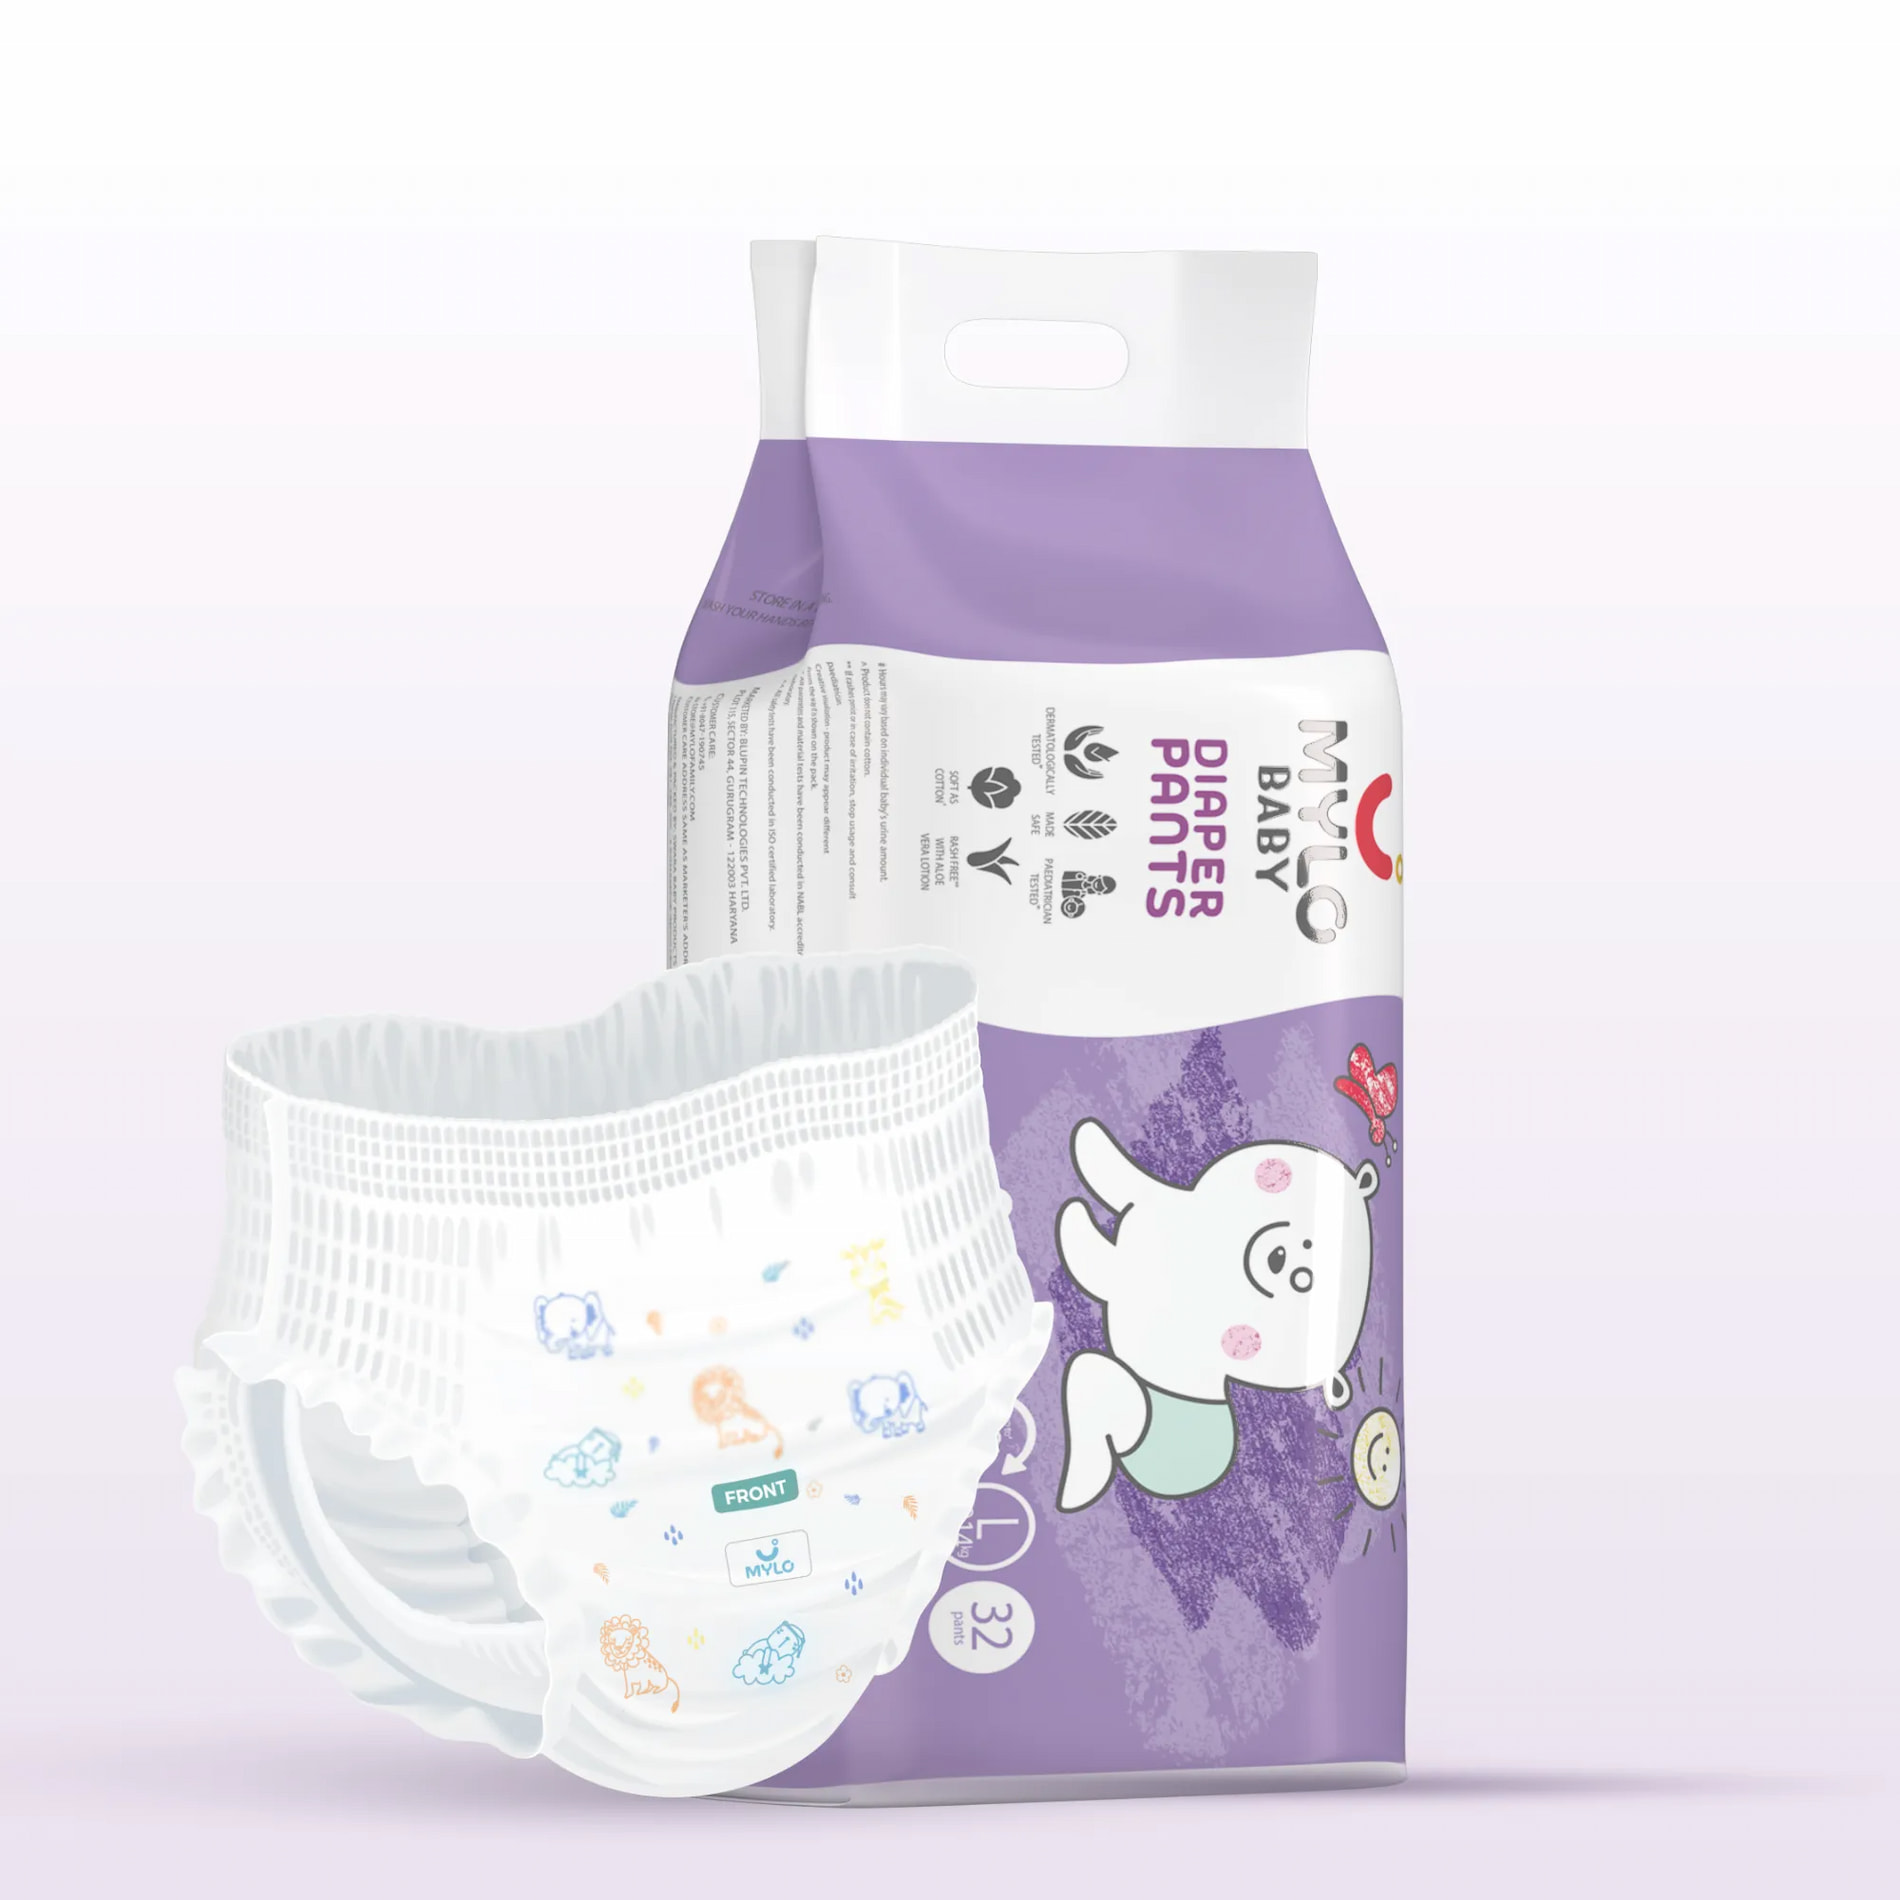 Baby Diaper Pants Large (L) Size, 9-14 kgs with ADL Technology - 32 Count - 12 Hours Protection